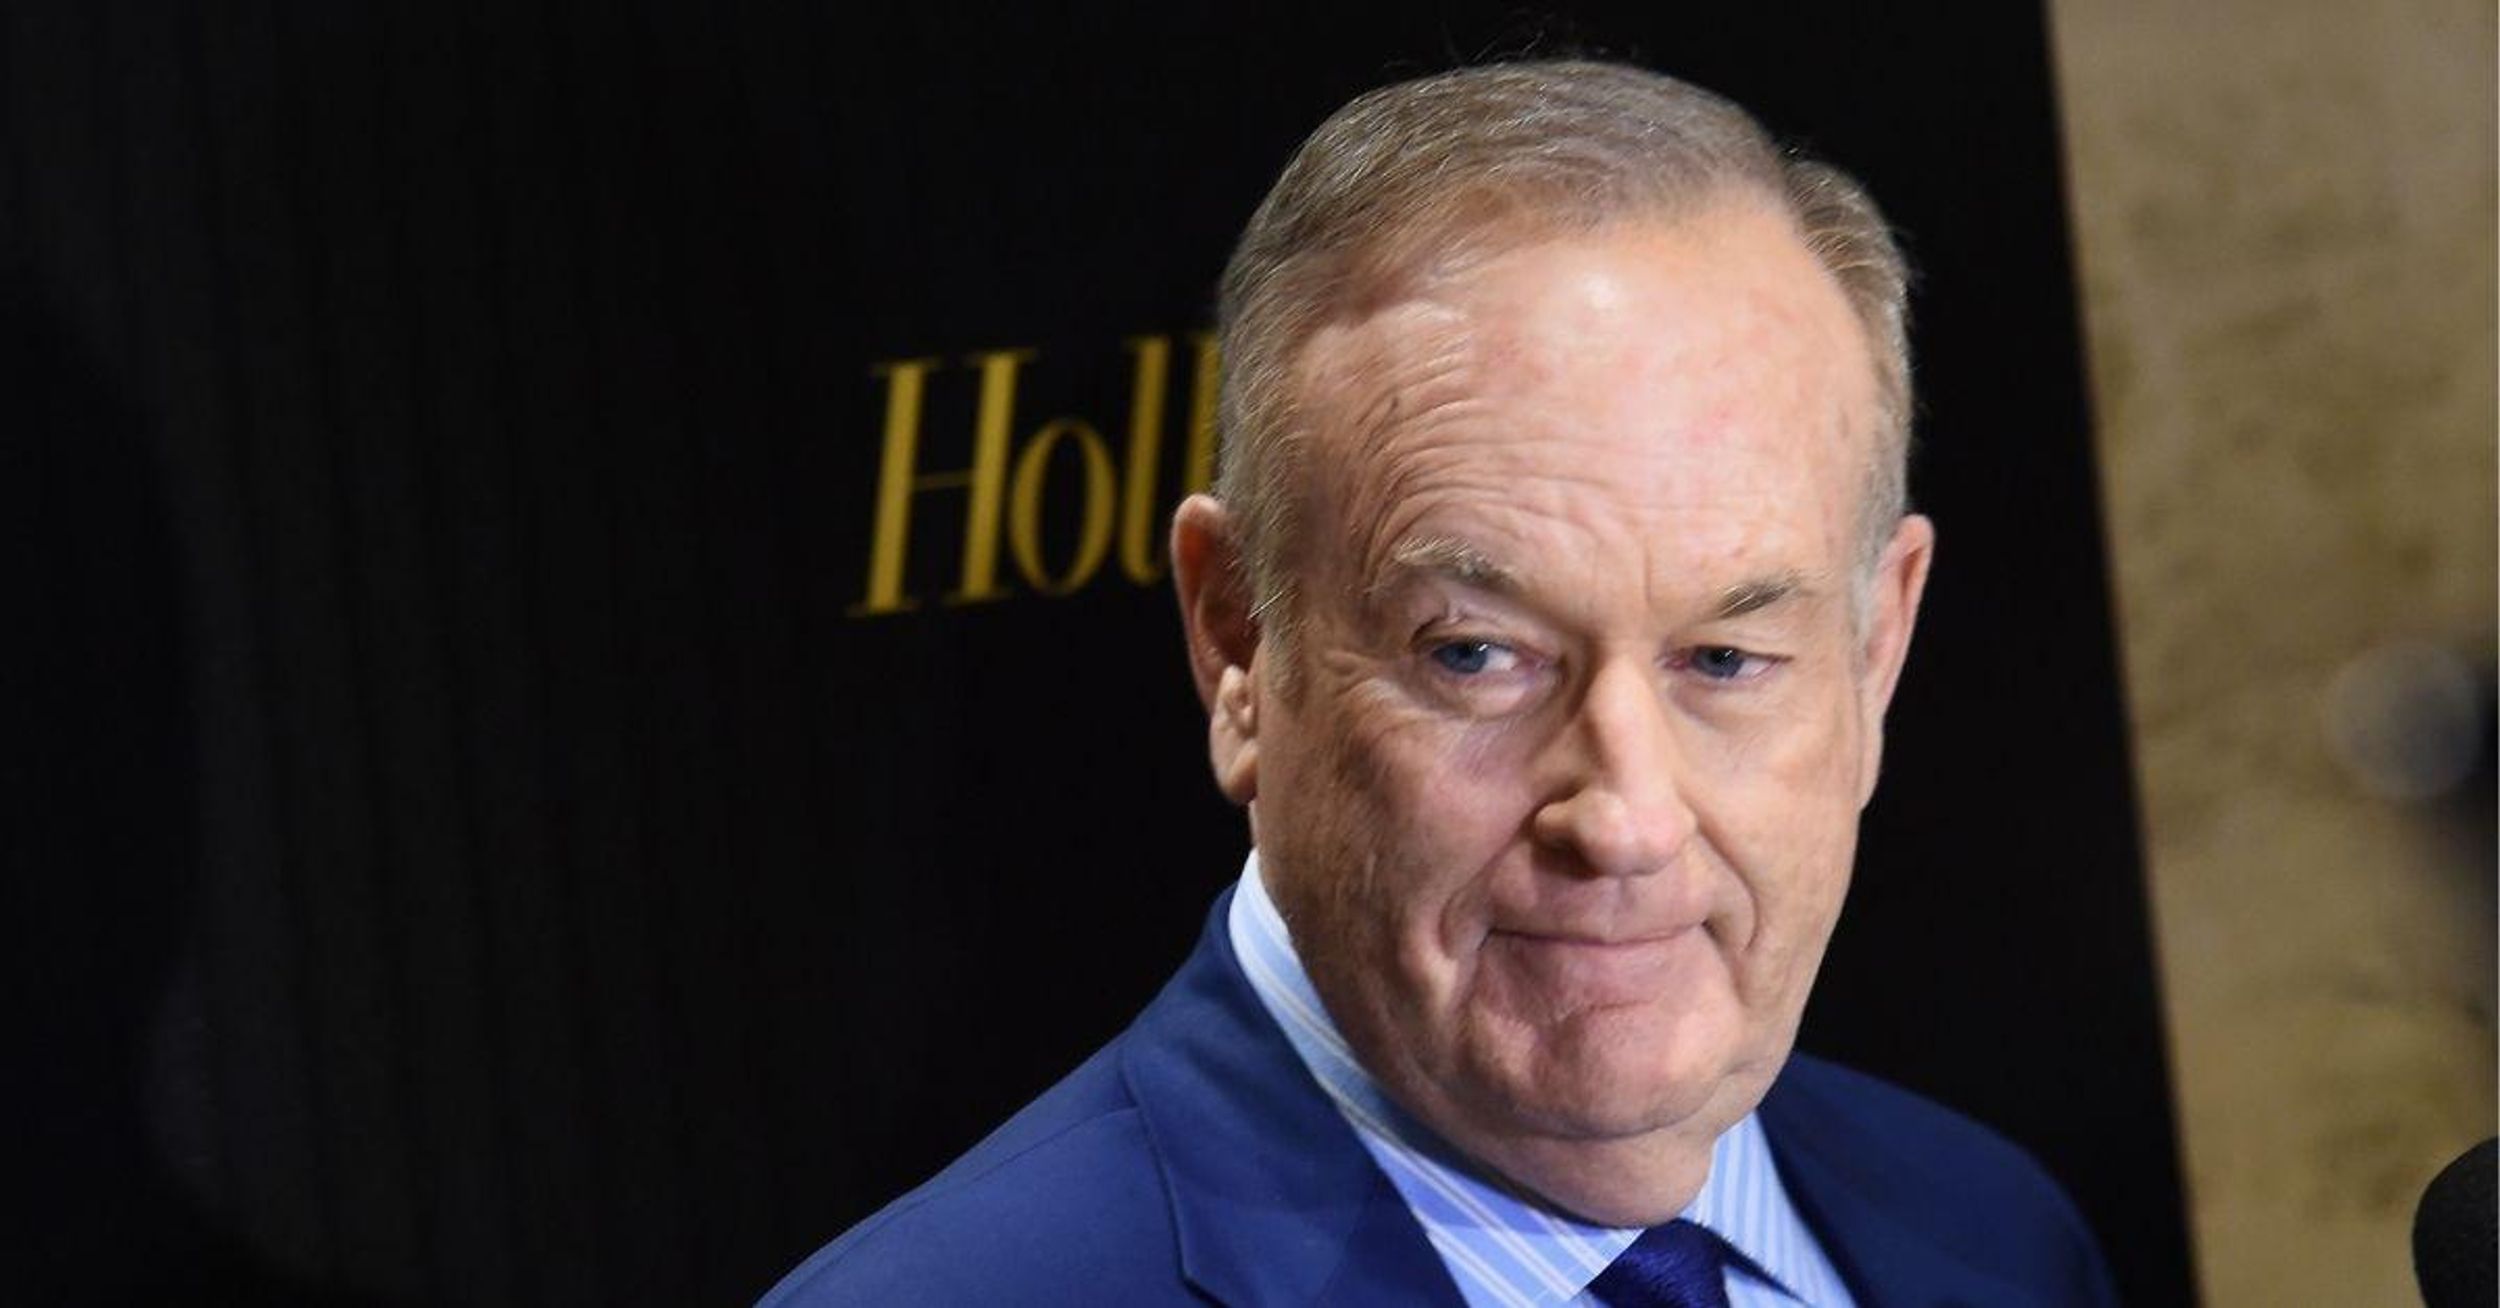 Bill O'Reilly Just Questioned Where The Rise In White Supremacy Is—And Twitter Made Him Pay Dearly